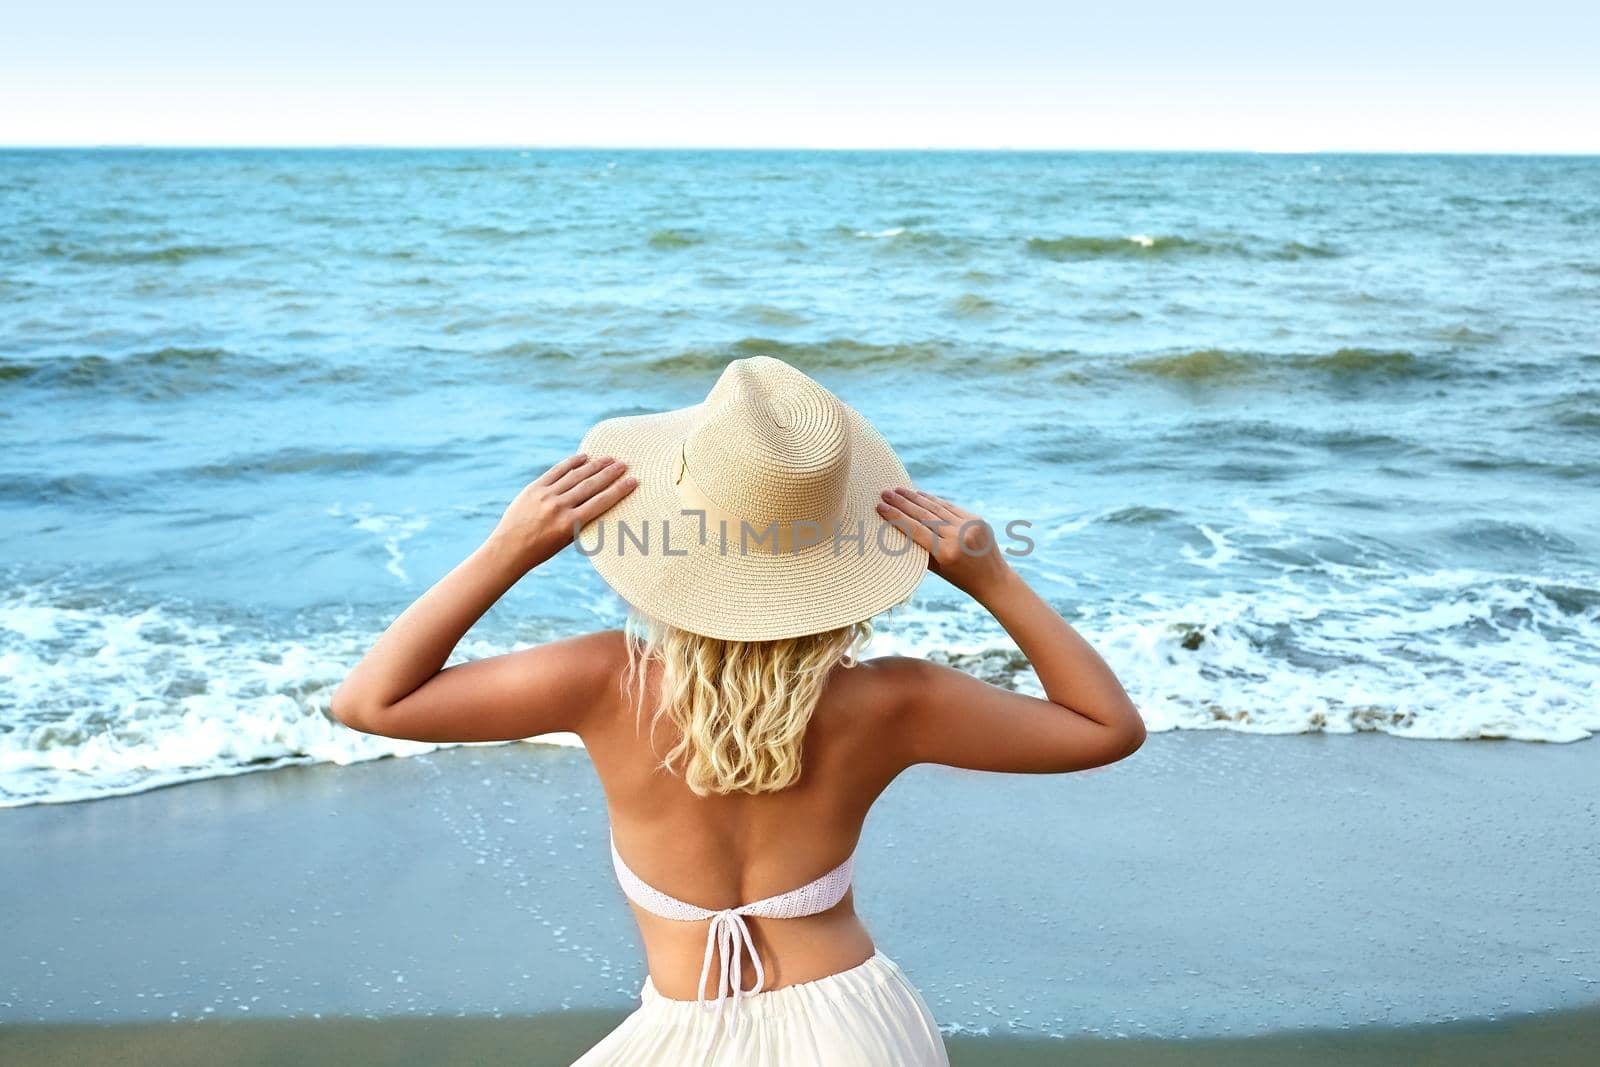 Blonde Woman in Fashion Summer Style Standing at Sea and Holding Hat. Luxury Lifestyle Rear View. Summer Vacation Concept with Ocean. Soul Relaxing, Spirit Calm